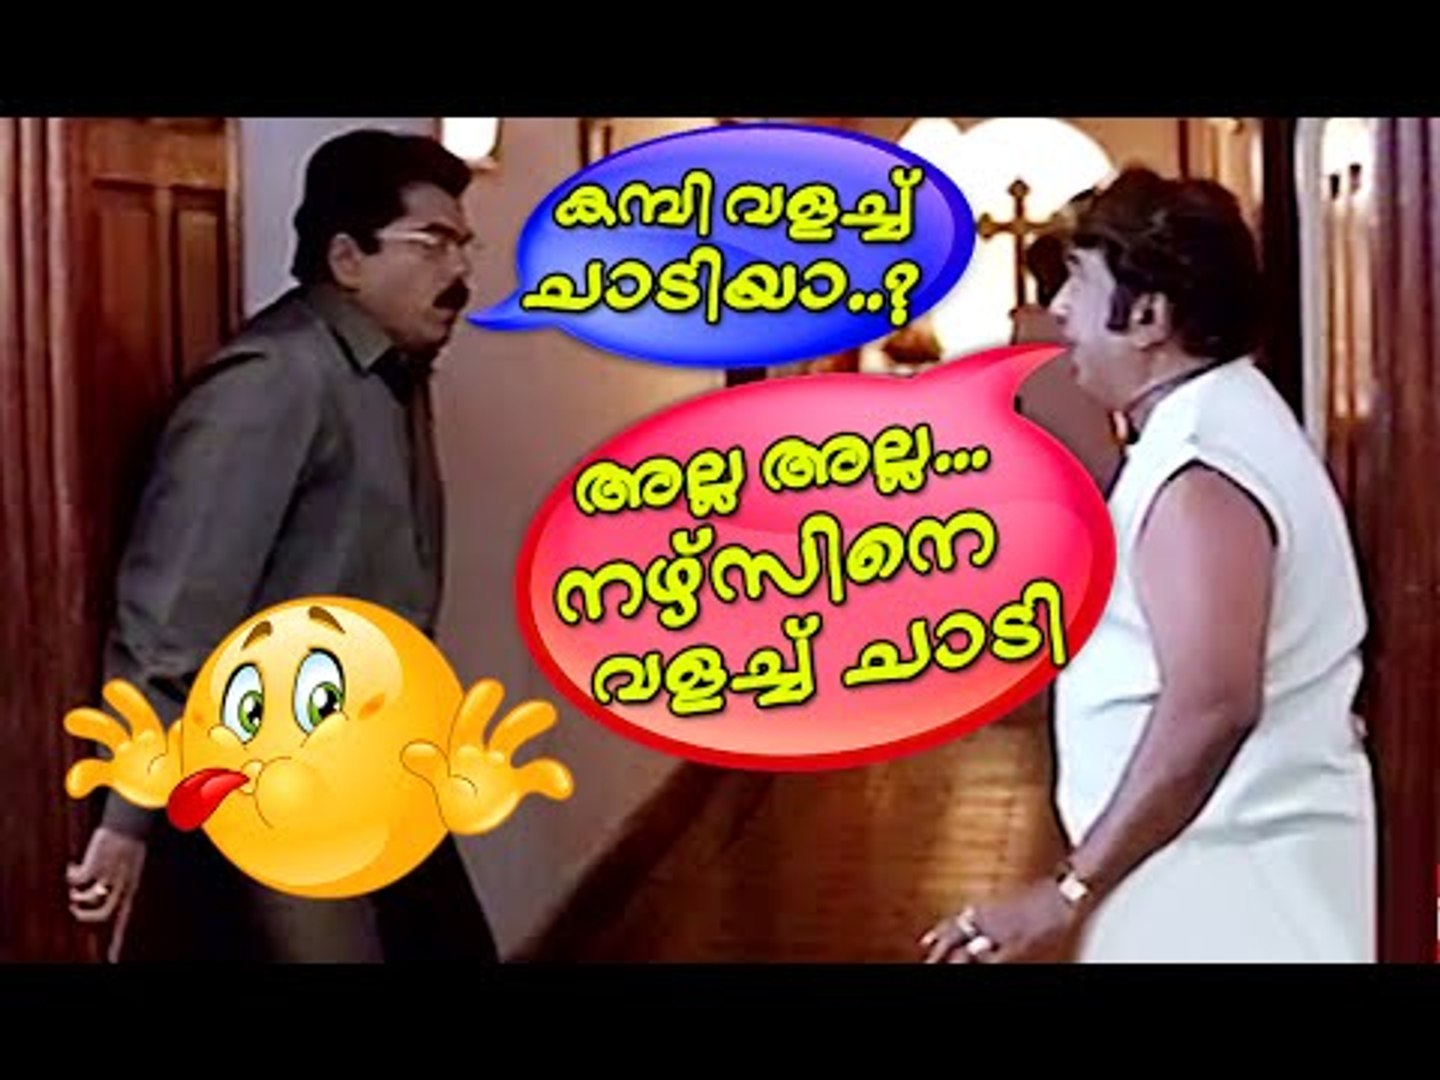 Malayalam Comedy Scenes From Movies | Cochin Haneefa Comedy Scenes | Malayalam Comedy Movies [HD]